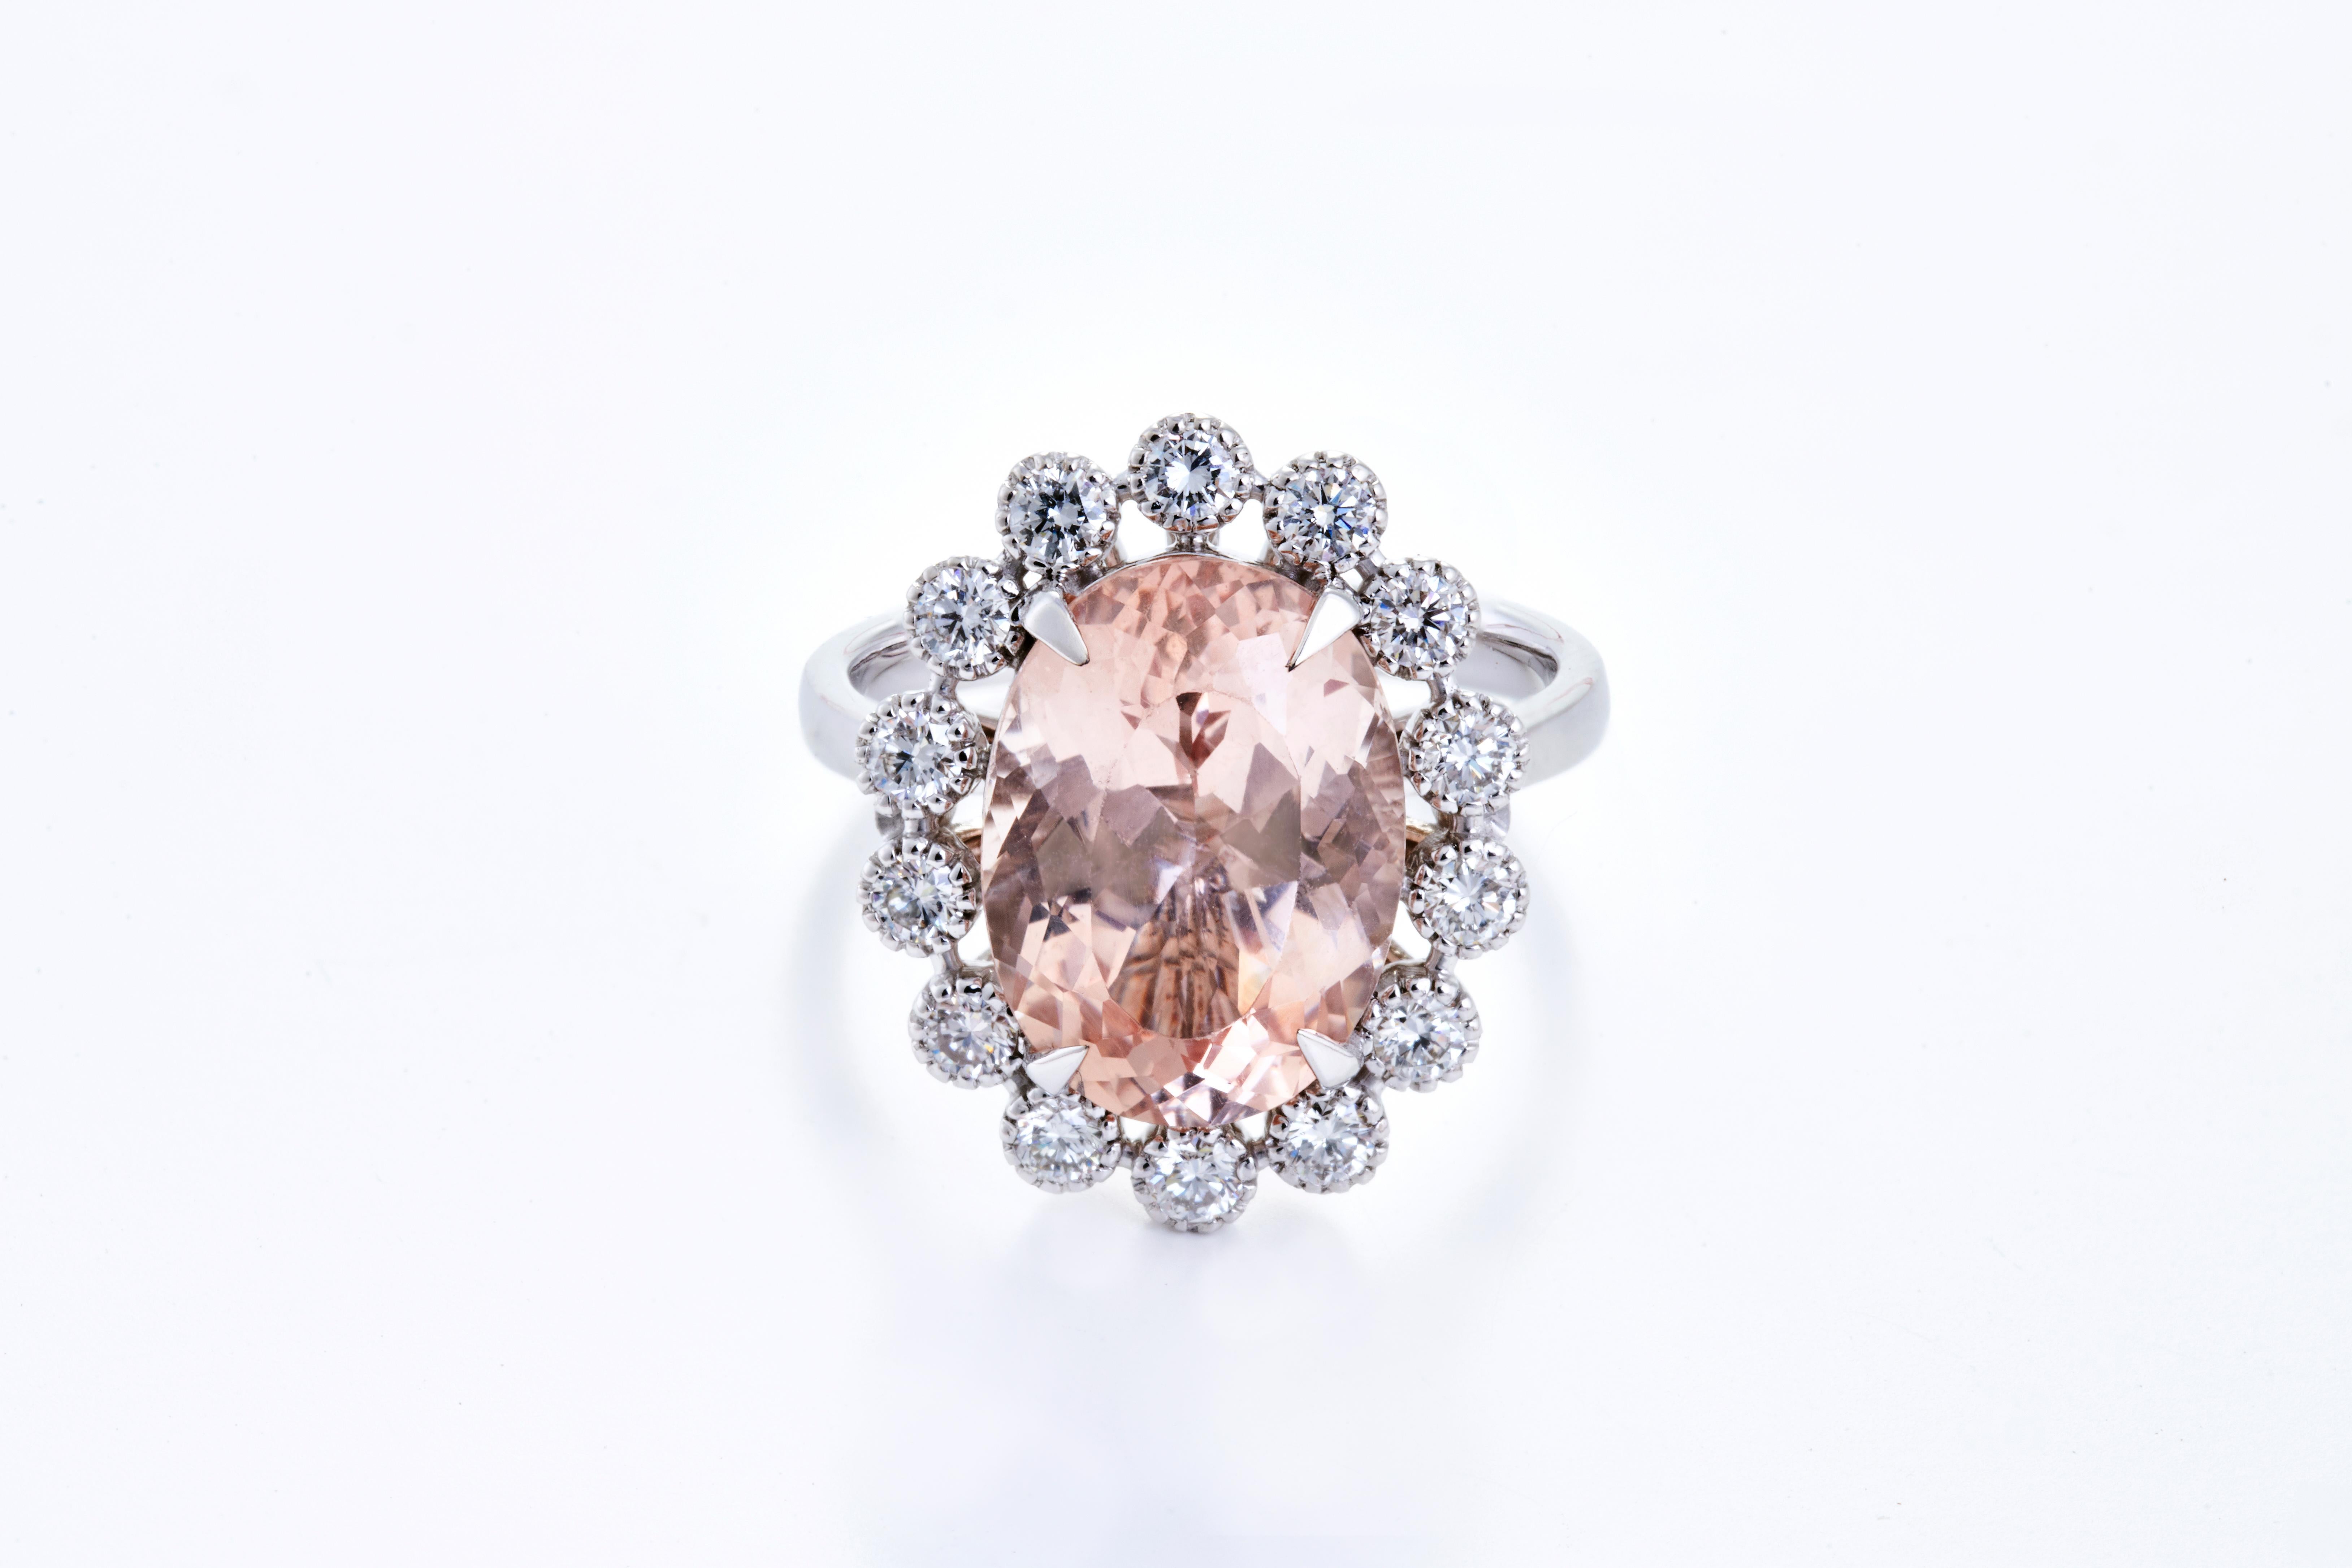 Set in 7.17 grams of 18K White Gold with 14 round cut diamonds around the Gemstone in VS/G quality and colour weighing 0.63 carats. 
Morganites have excellent durability, and enchanting shades of rose pink. Its warm overtones make Morganite